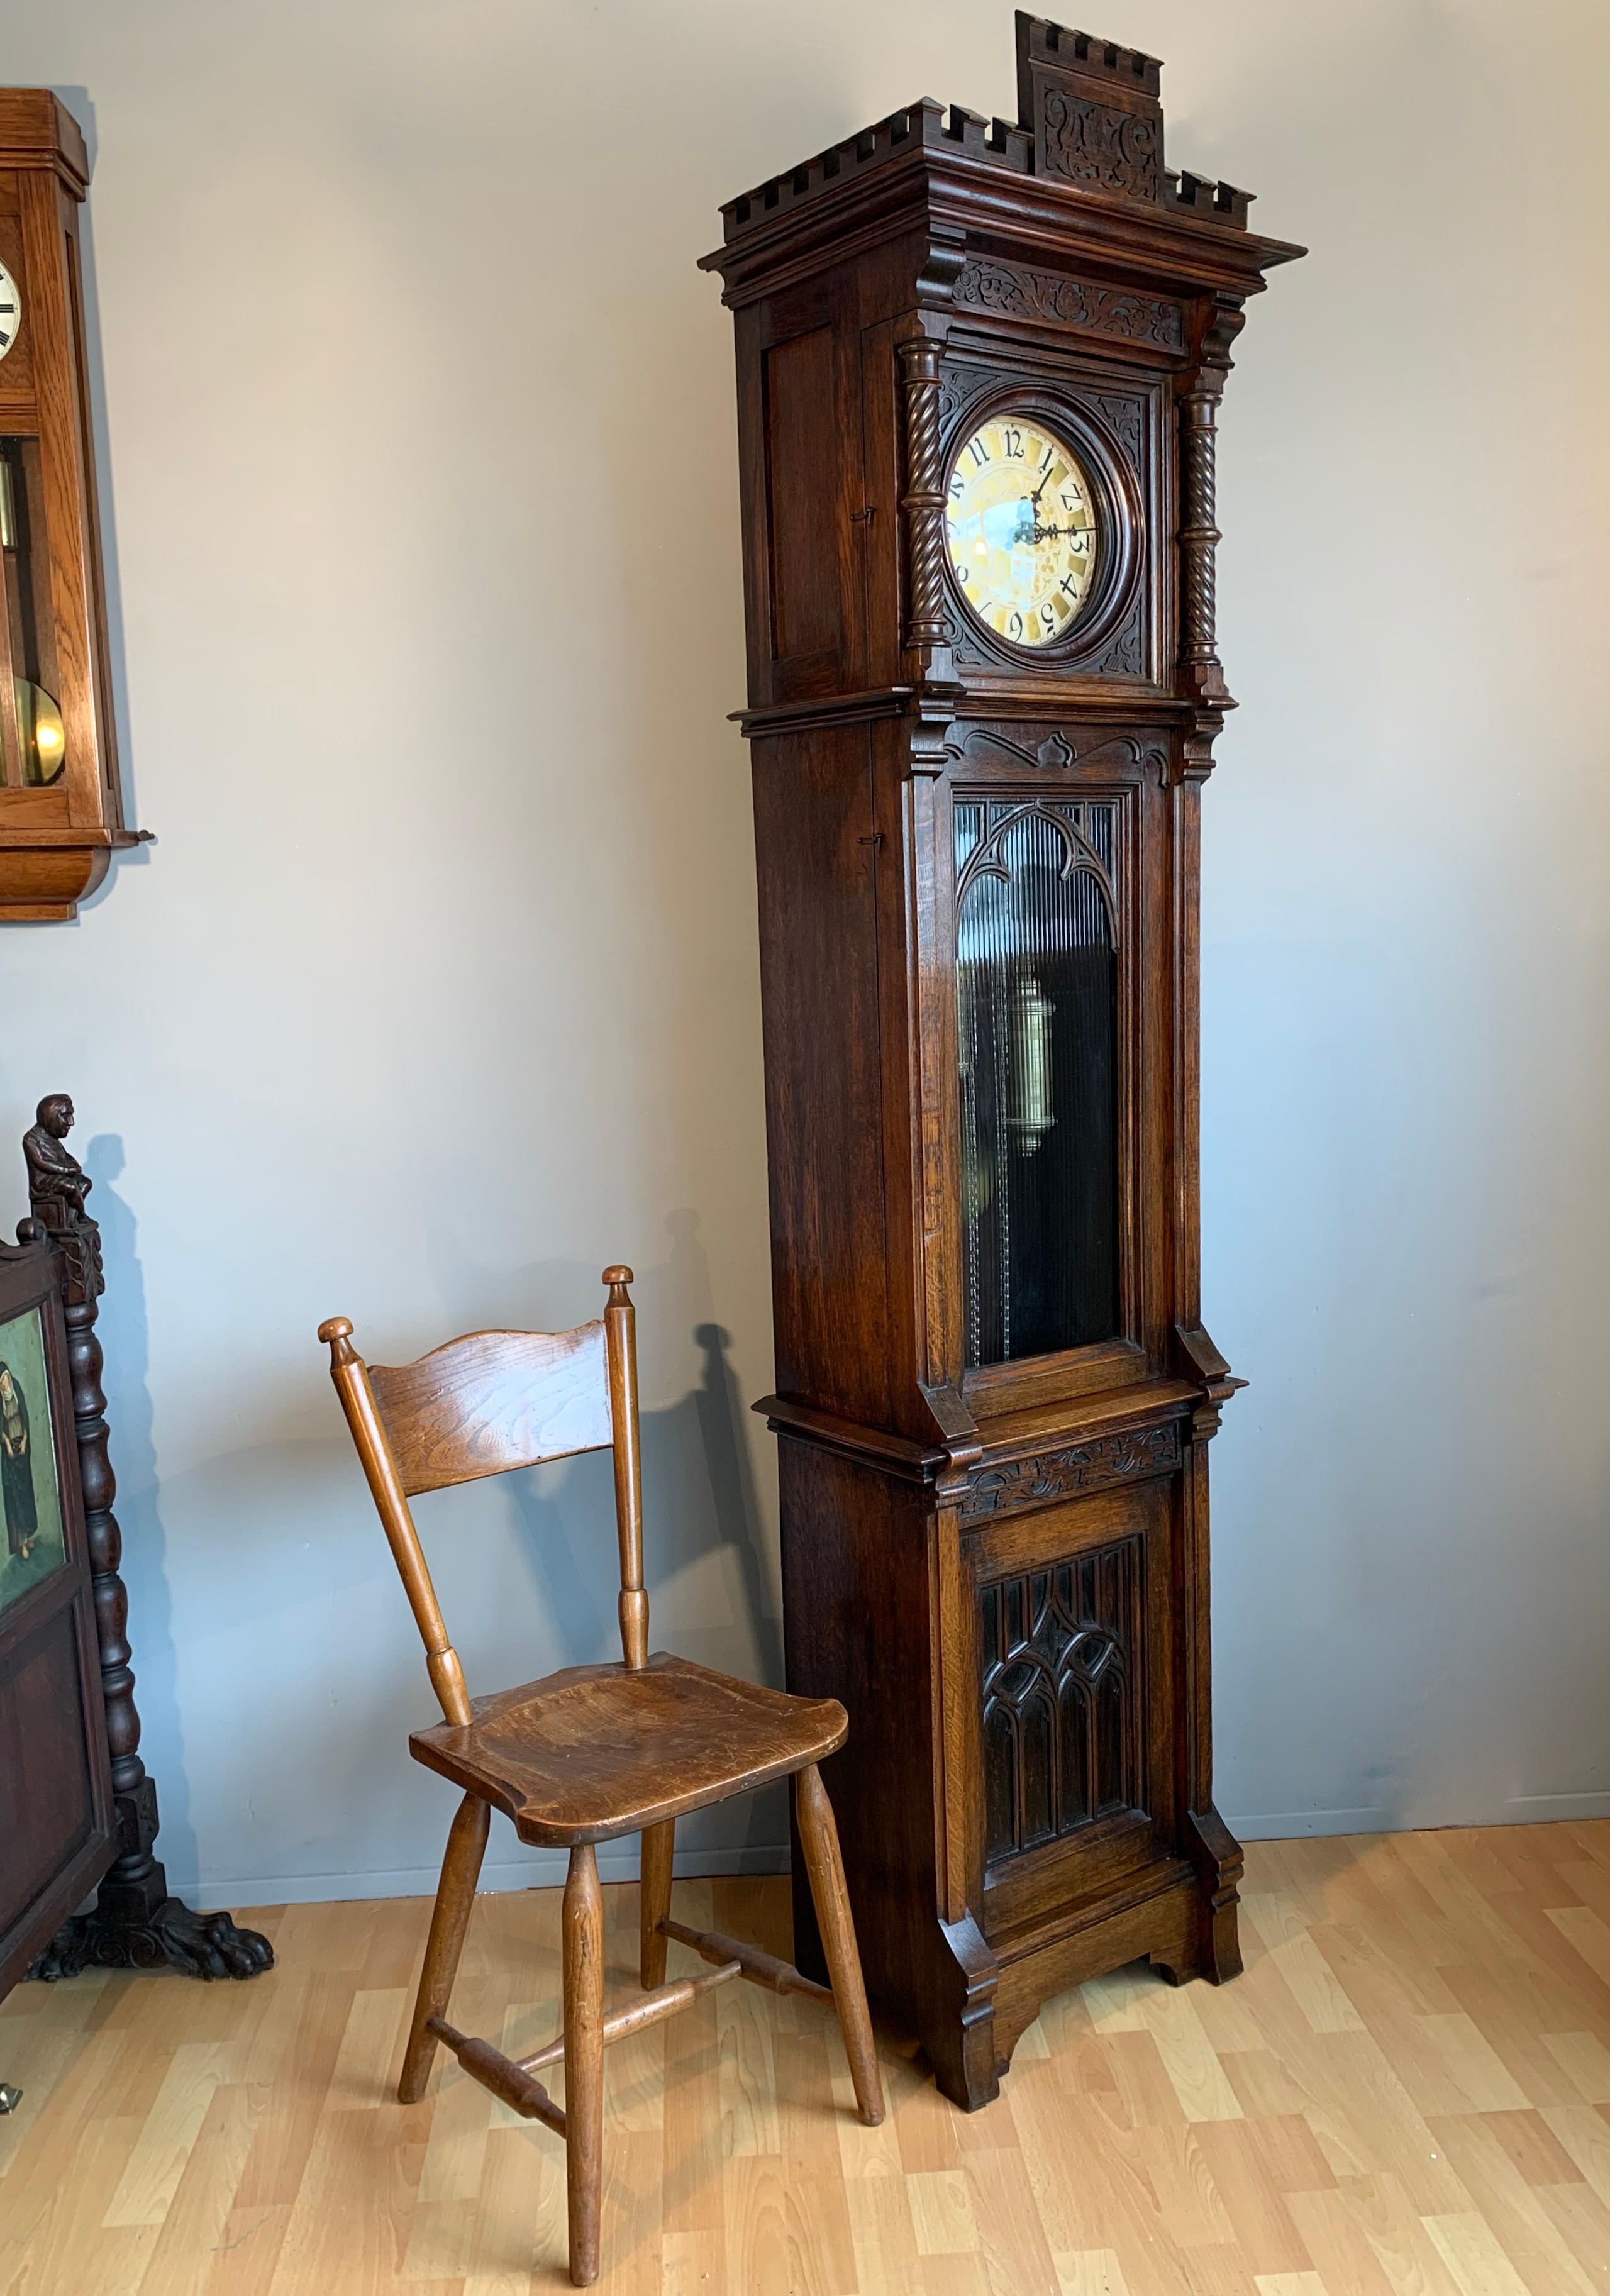 Brass Antique and Unique, Hand Carved Gothic Revival Grandfather or Longcase Clock